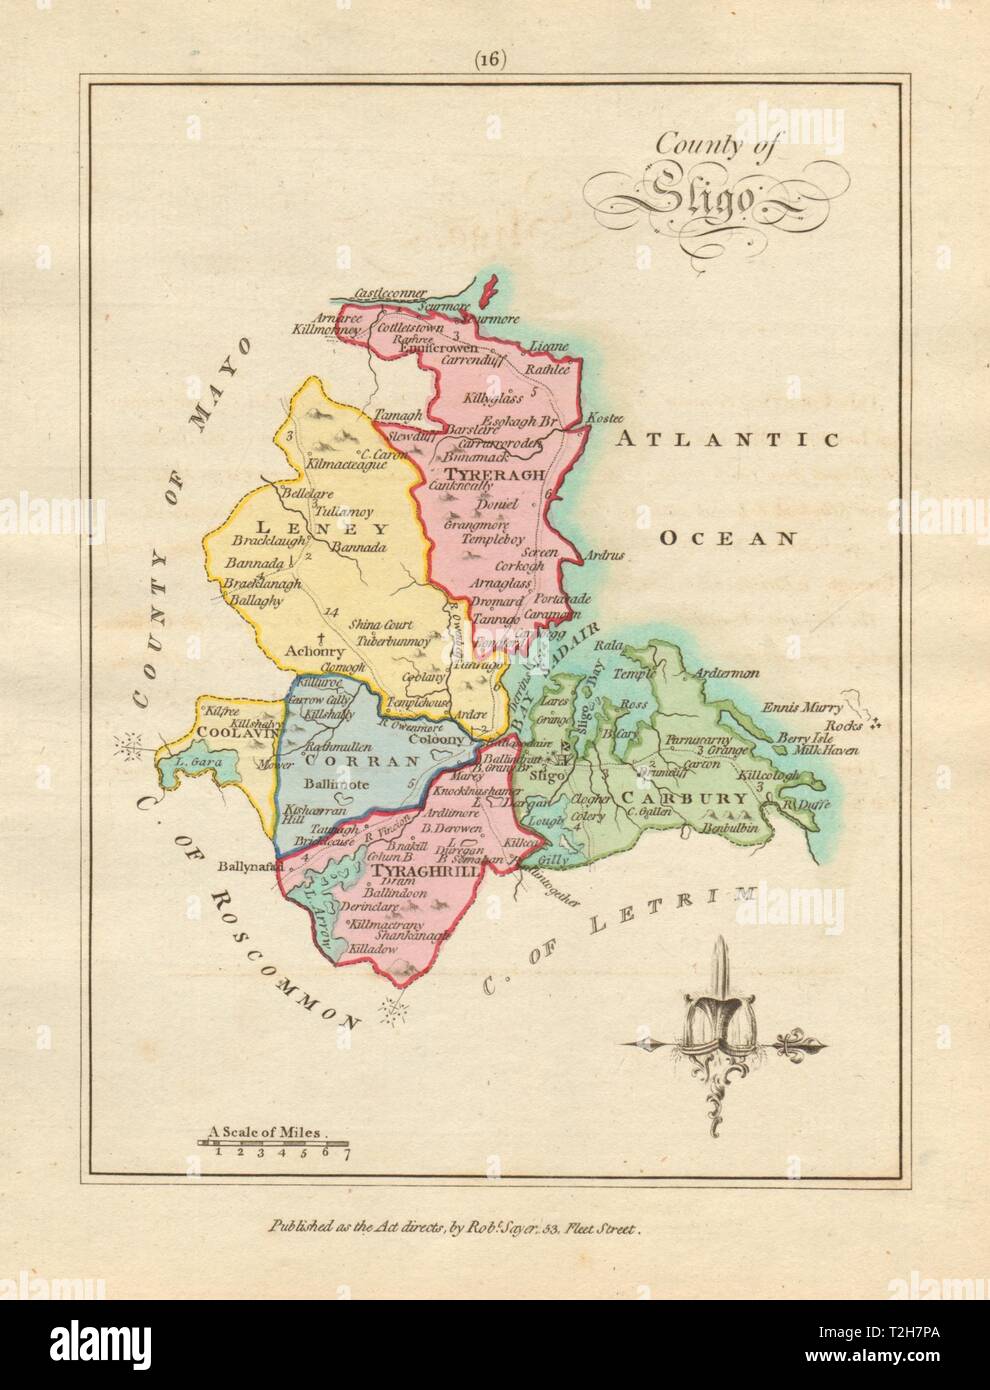 County of Sligo, Connaught. Antique copperplate map by Scalé / Sayer 1788 Stock Photo